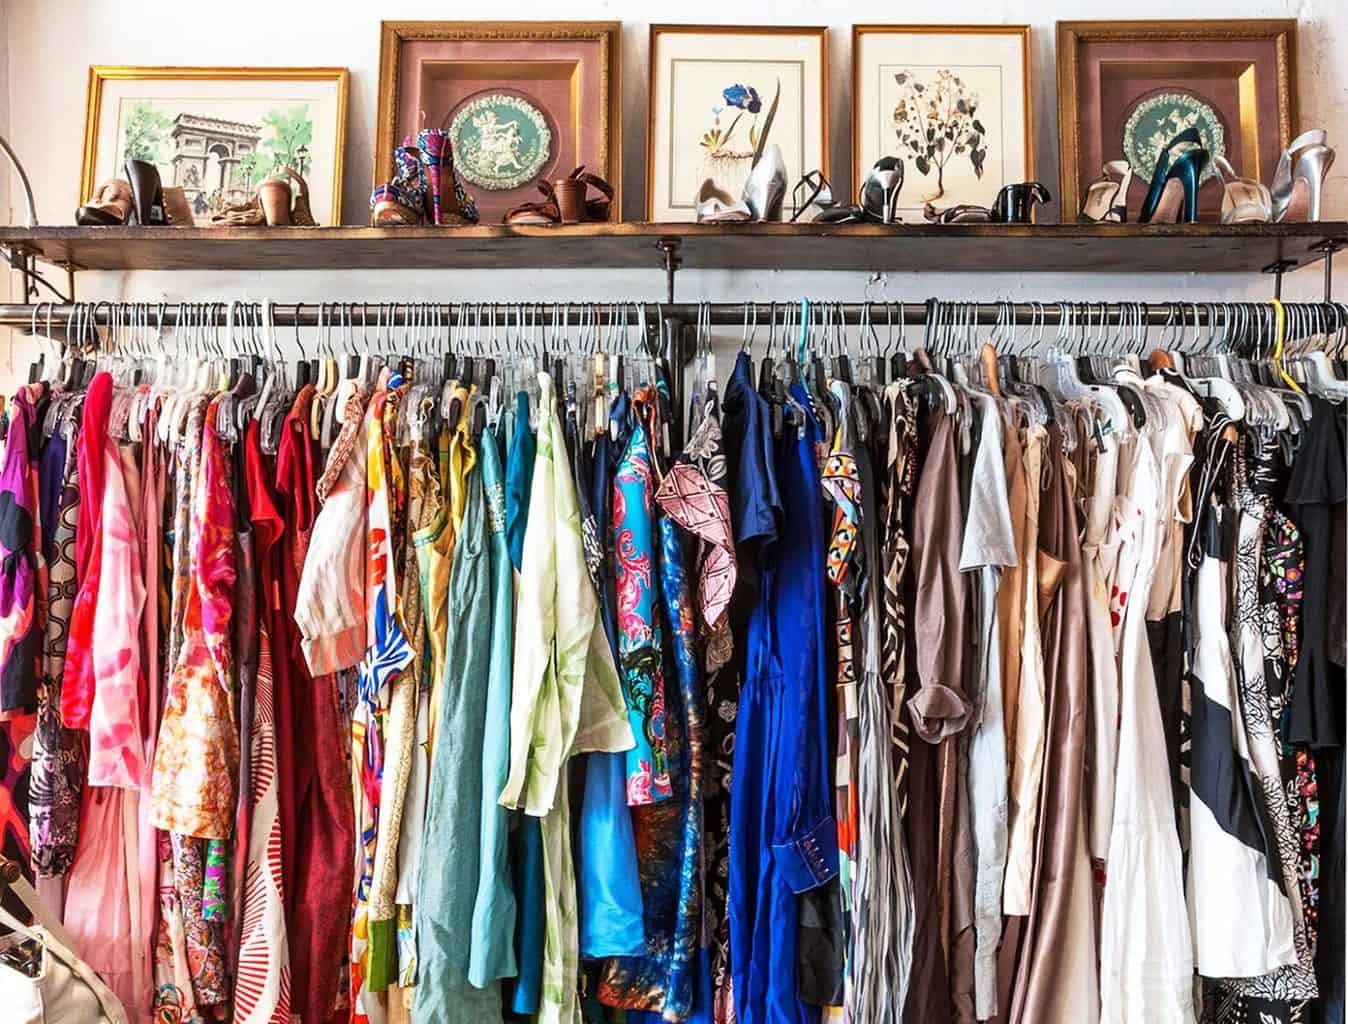 17 Thrifting Tips and Tricks to Shop Like A Pro - Thrifted & Taylor'd